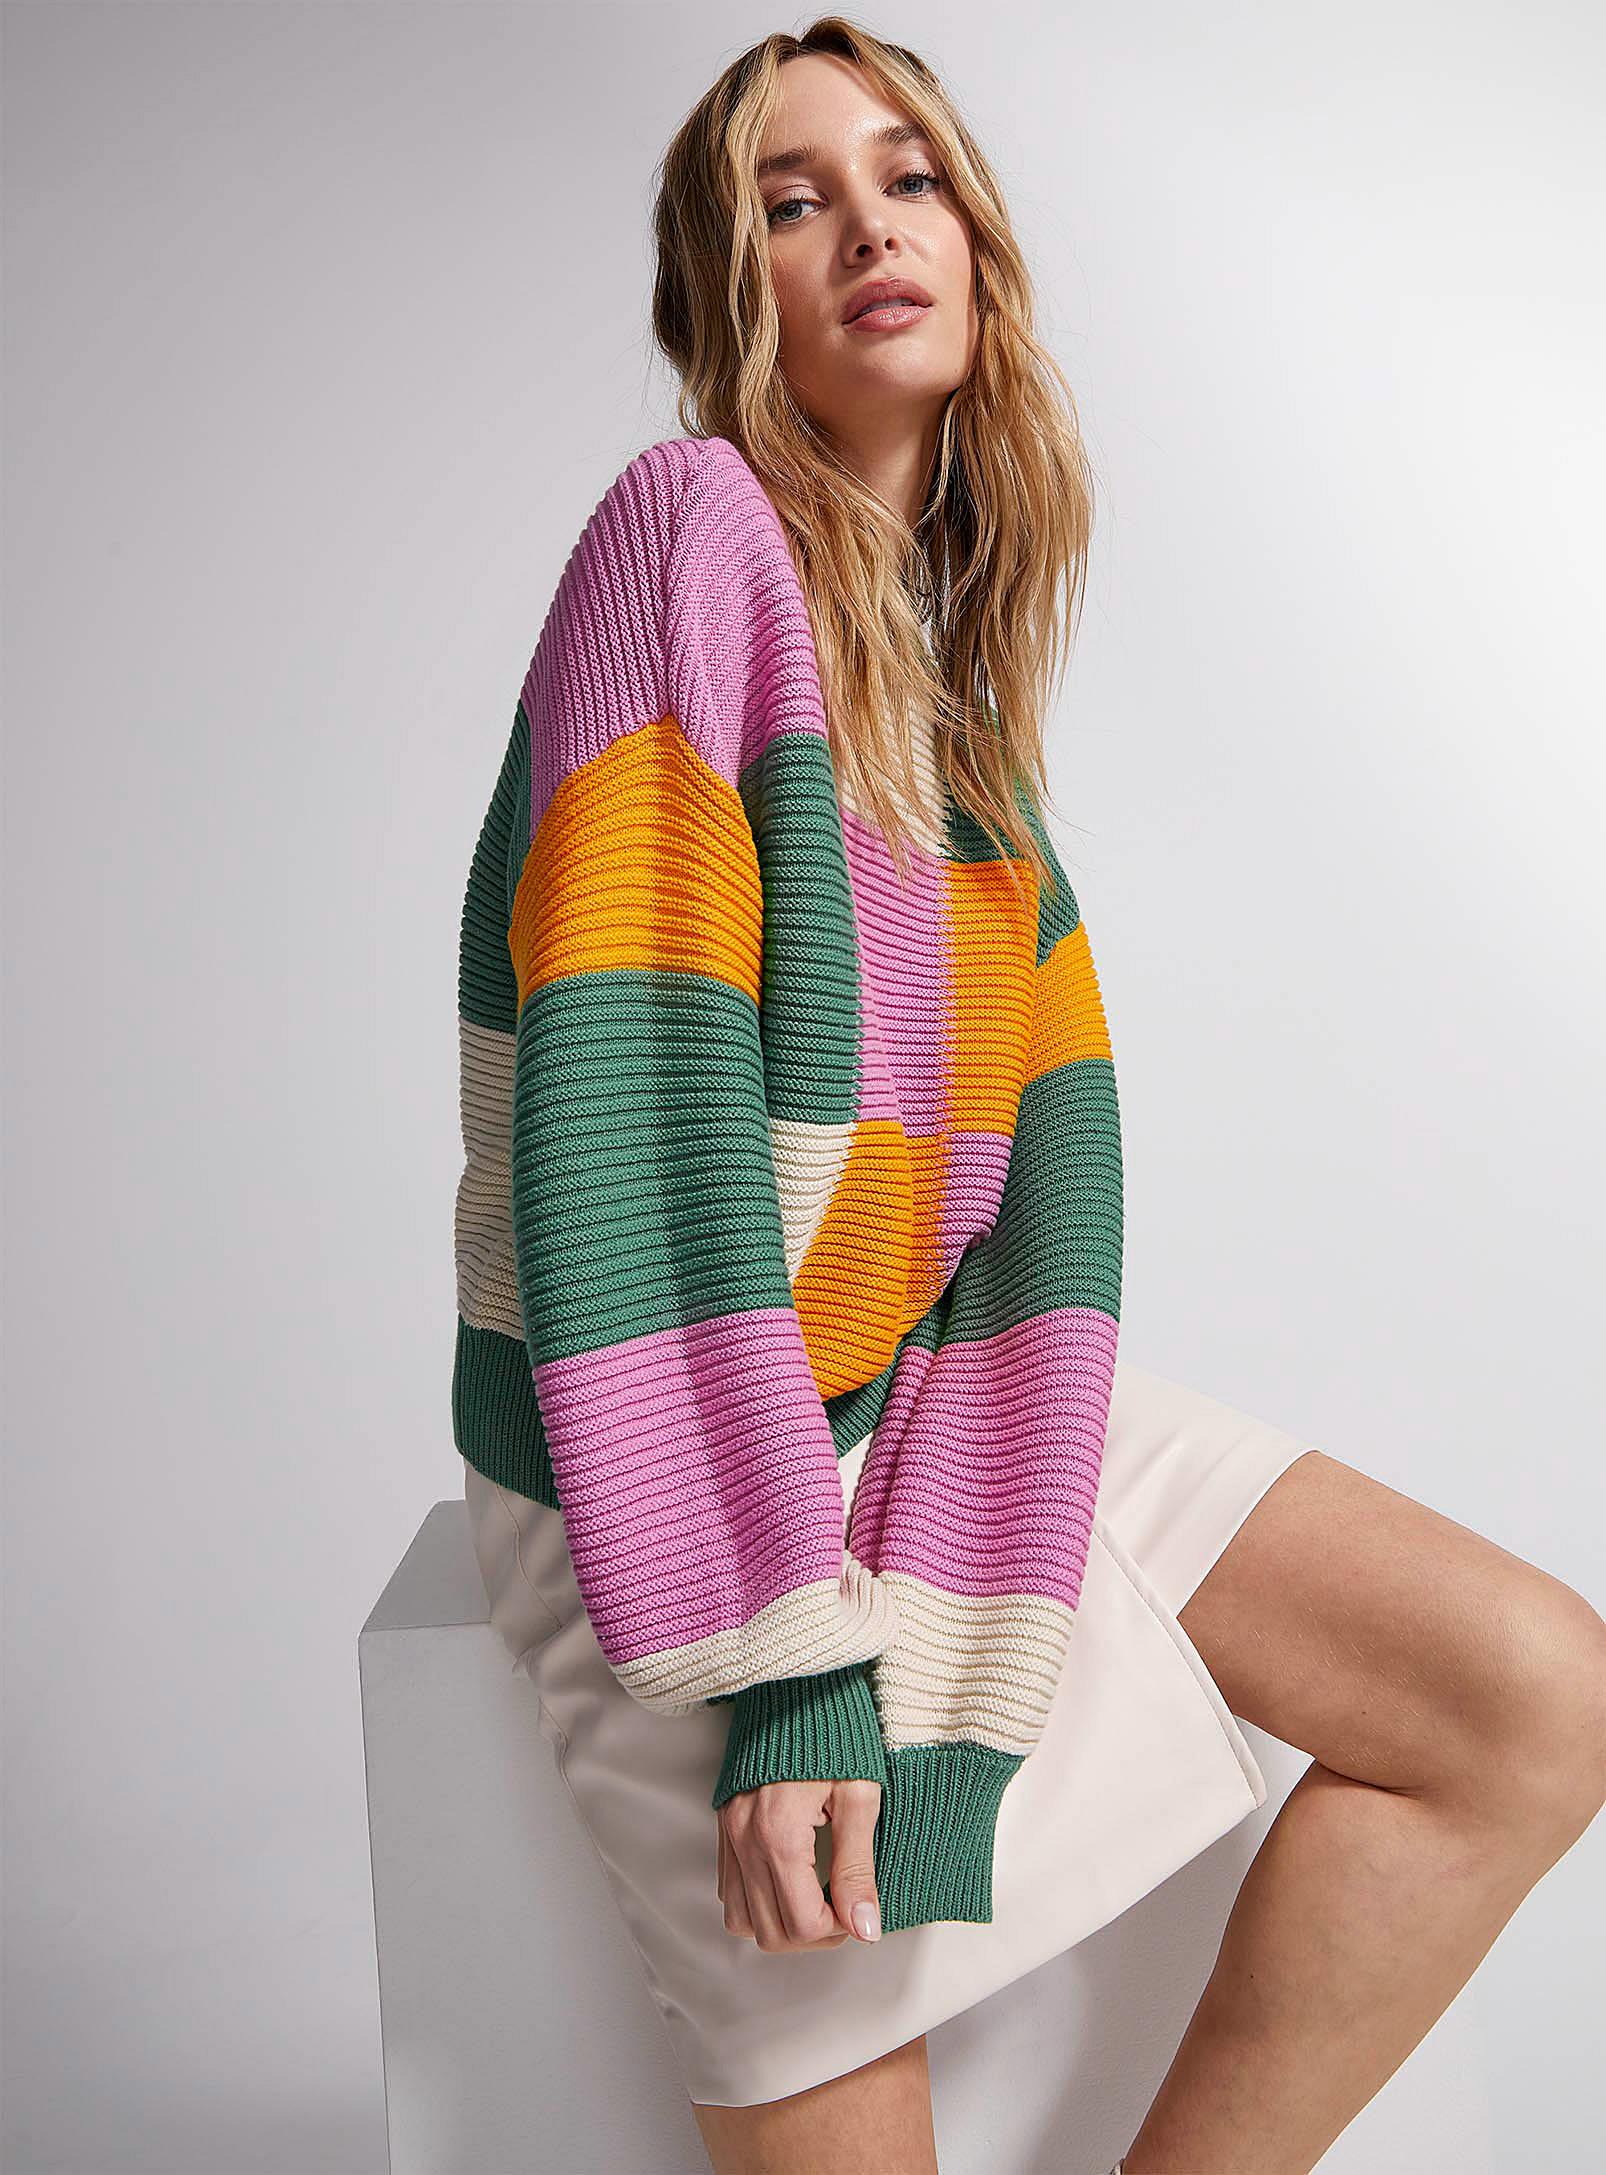 Vero Moda Colourful Checkerboard Ribbed Sweater in Pink | Lyst